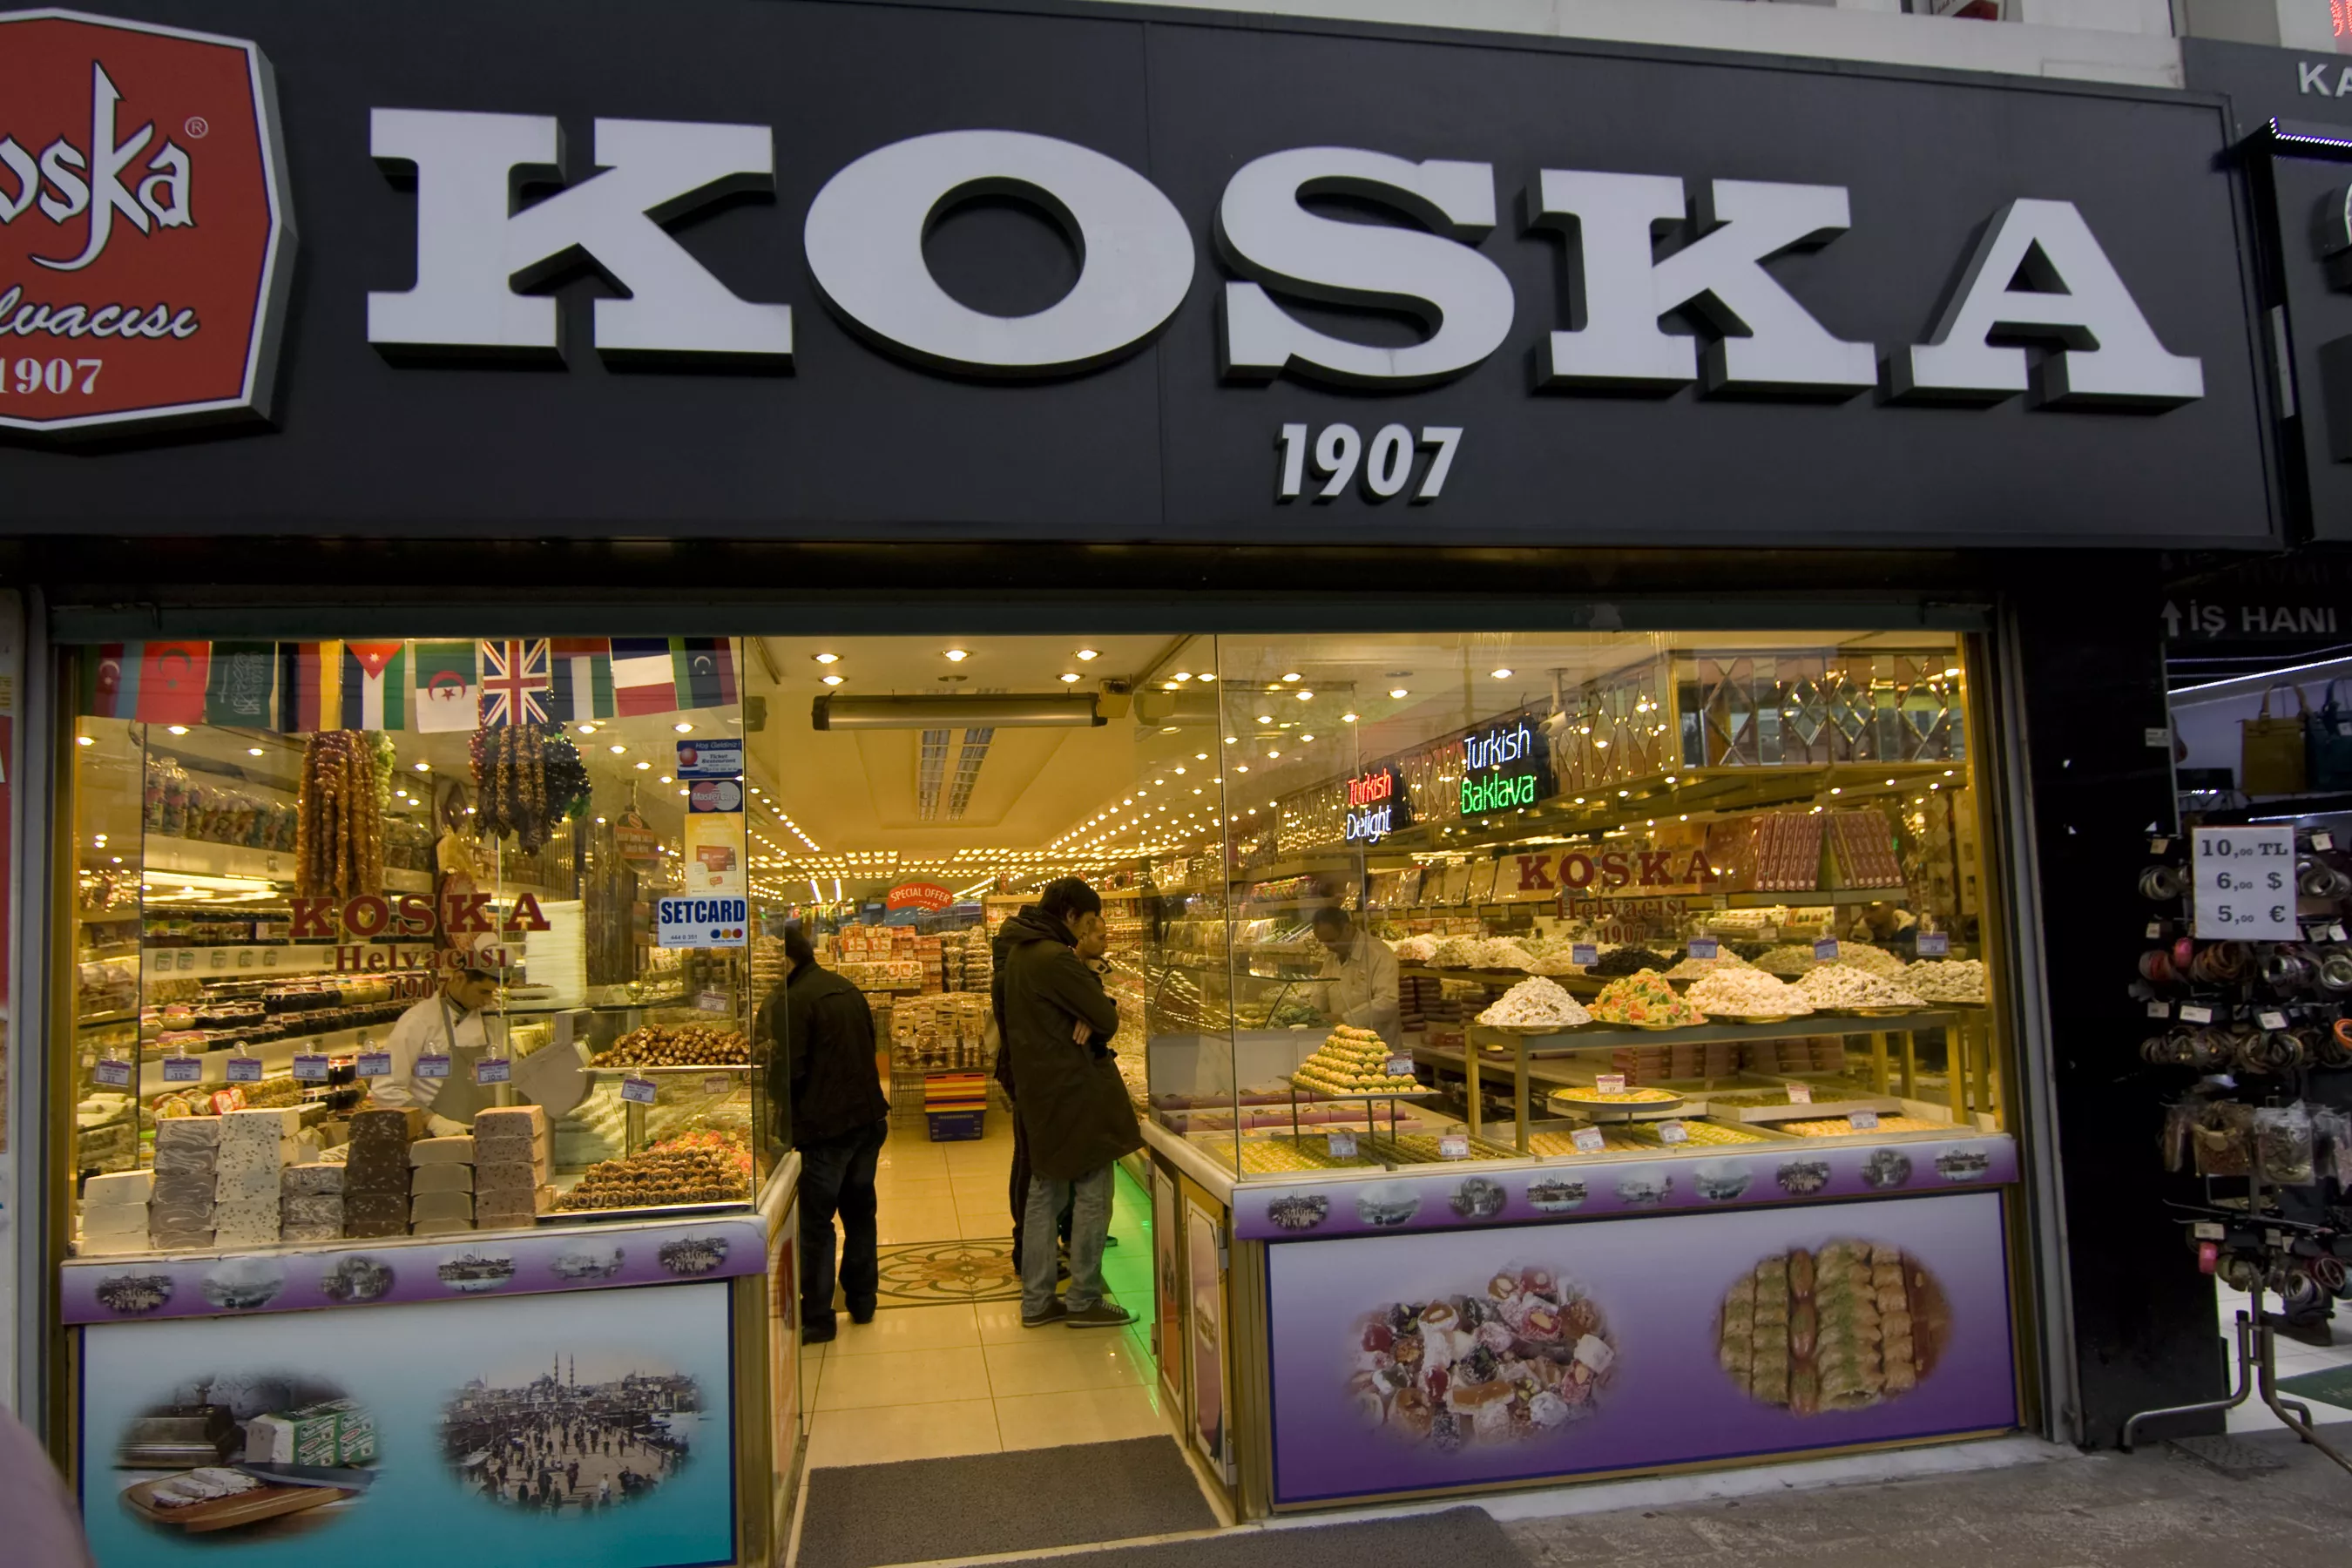 Koska in Turkey, central_asia | Groceries,Sweets - Country Helper